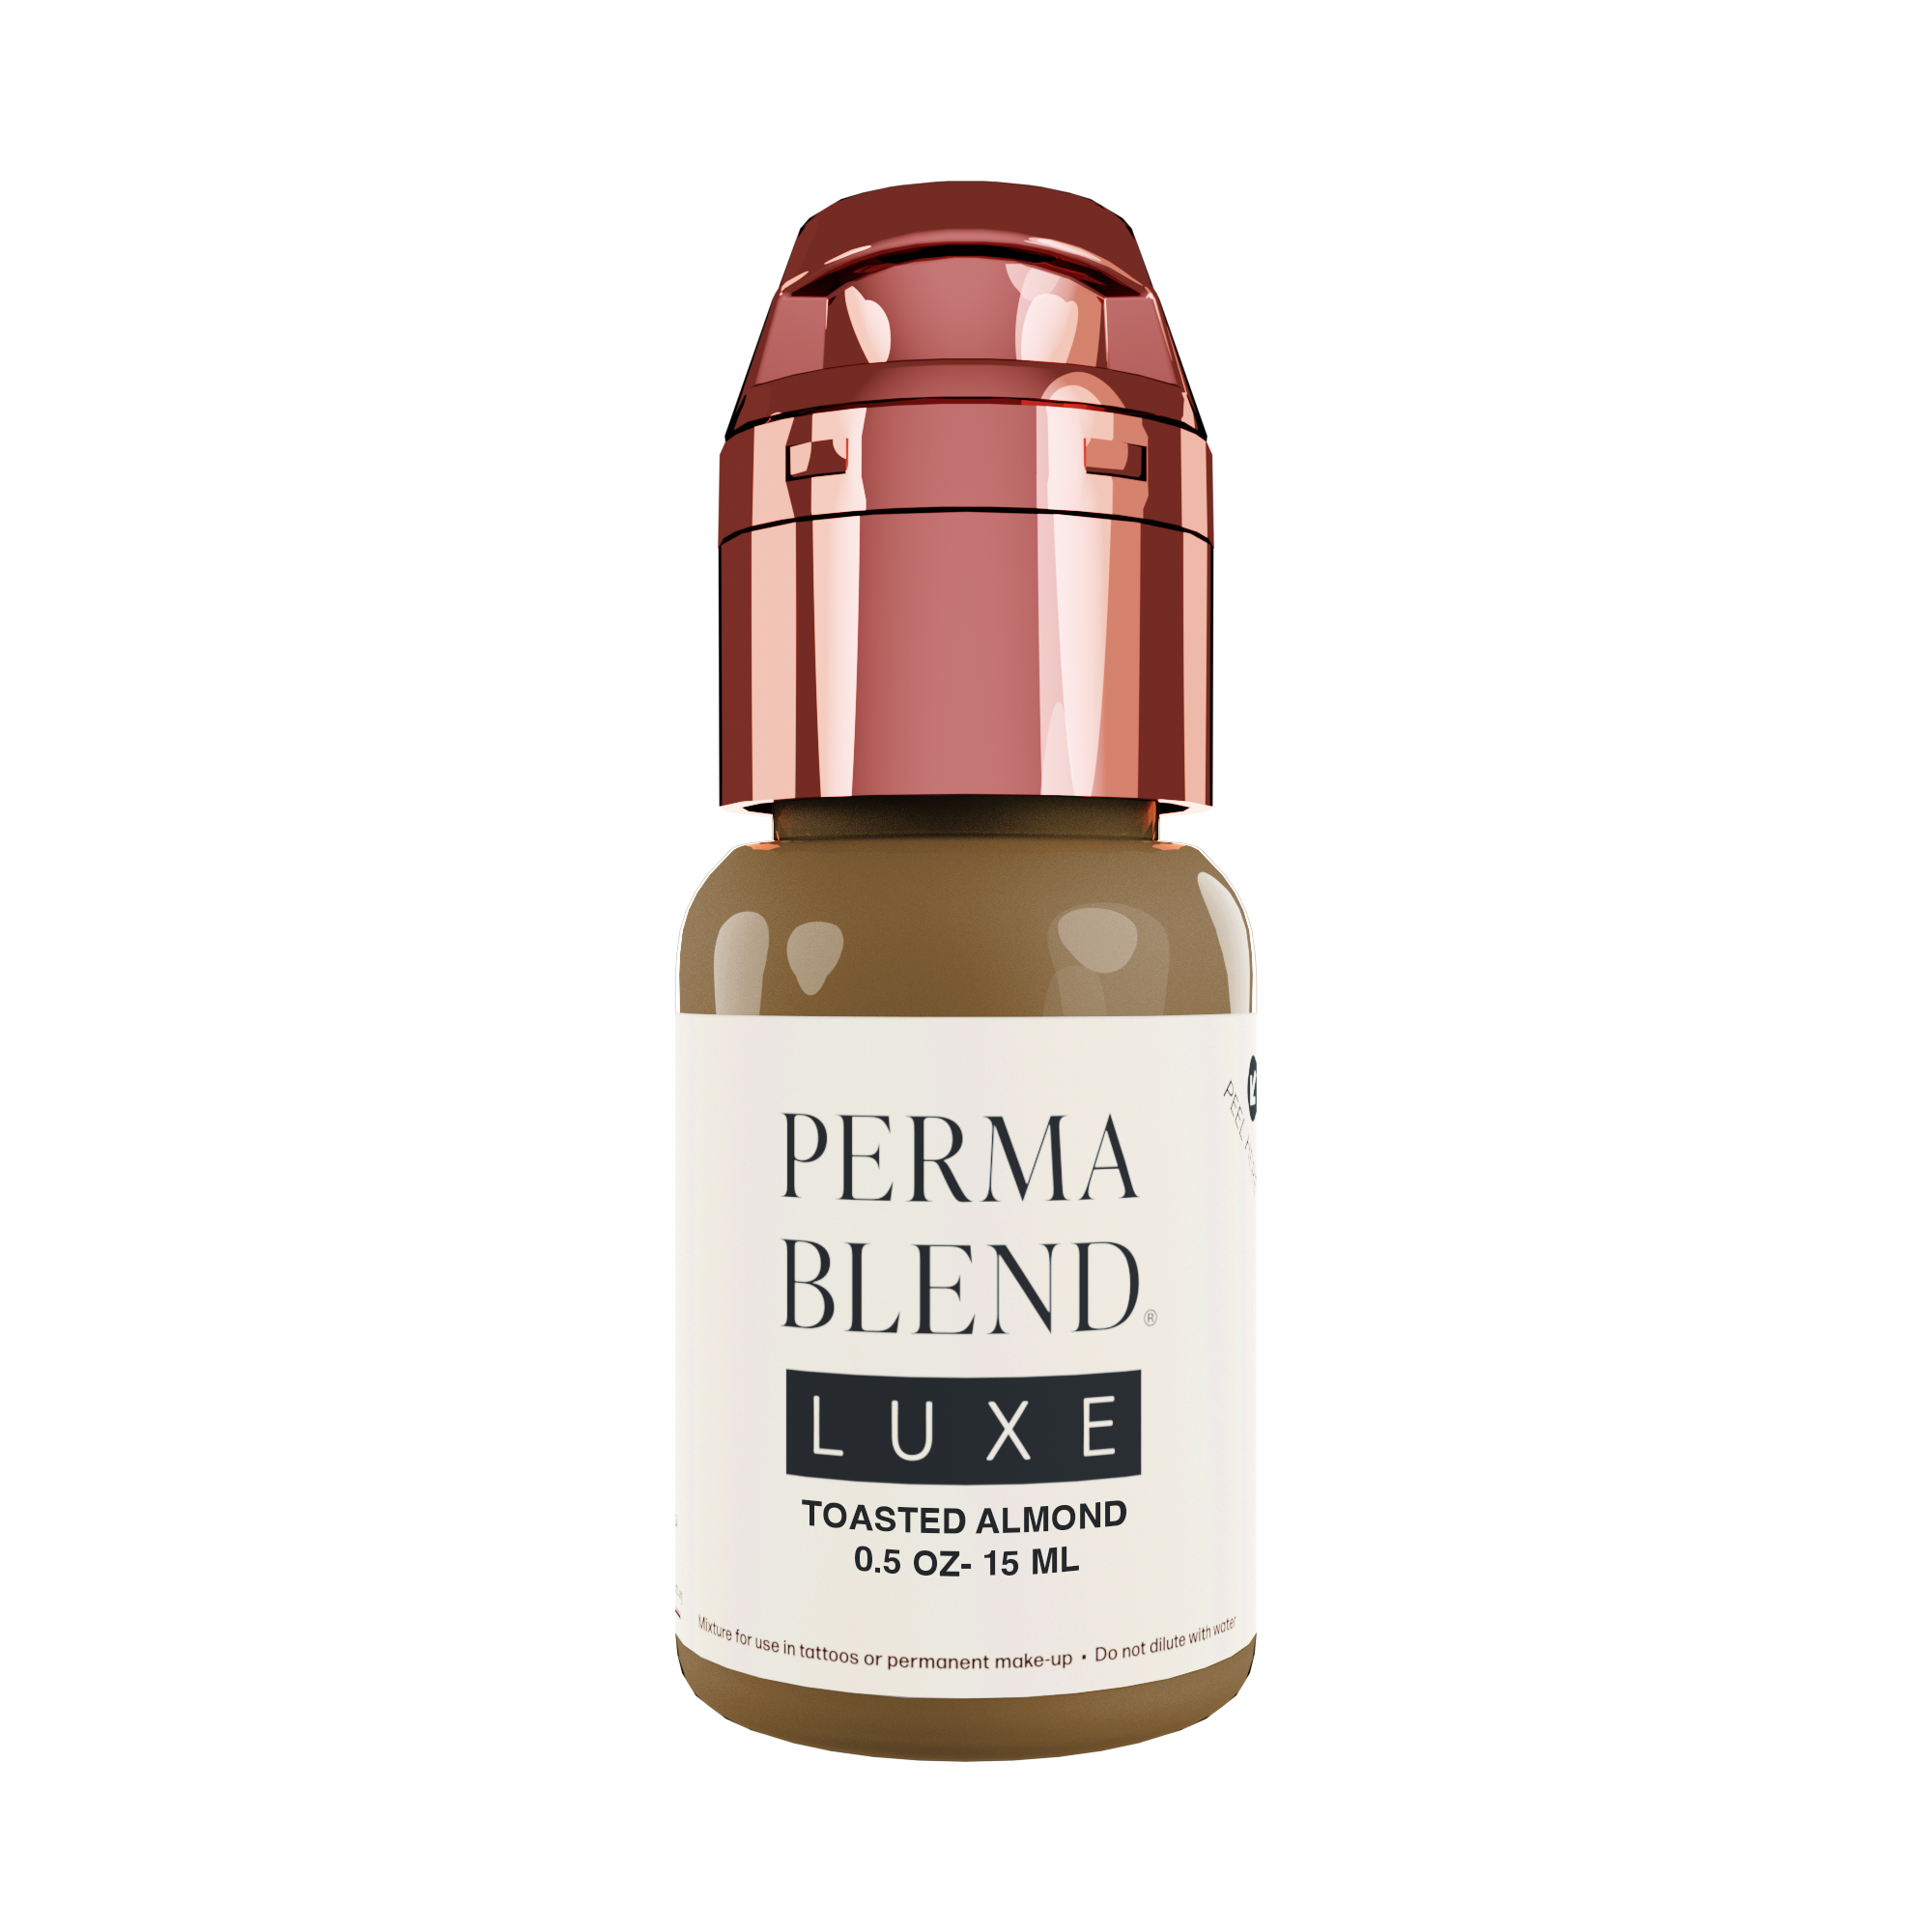 Perma Blend LUXE - Toasted Almond - 15ml - Dasha Tattoo Supply